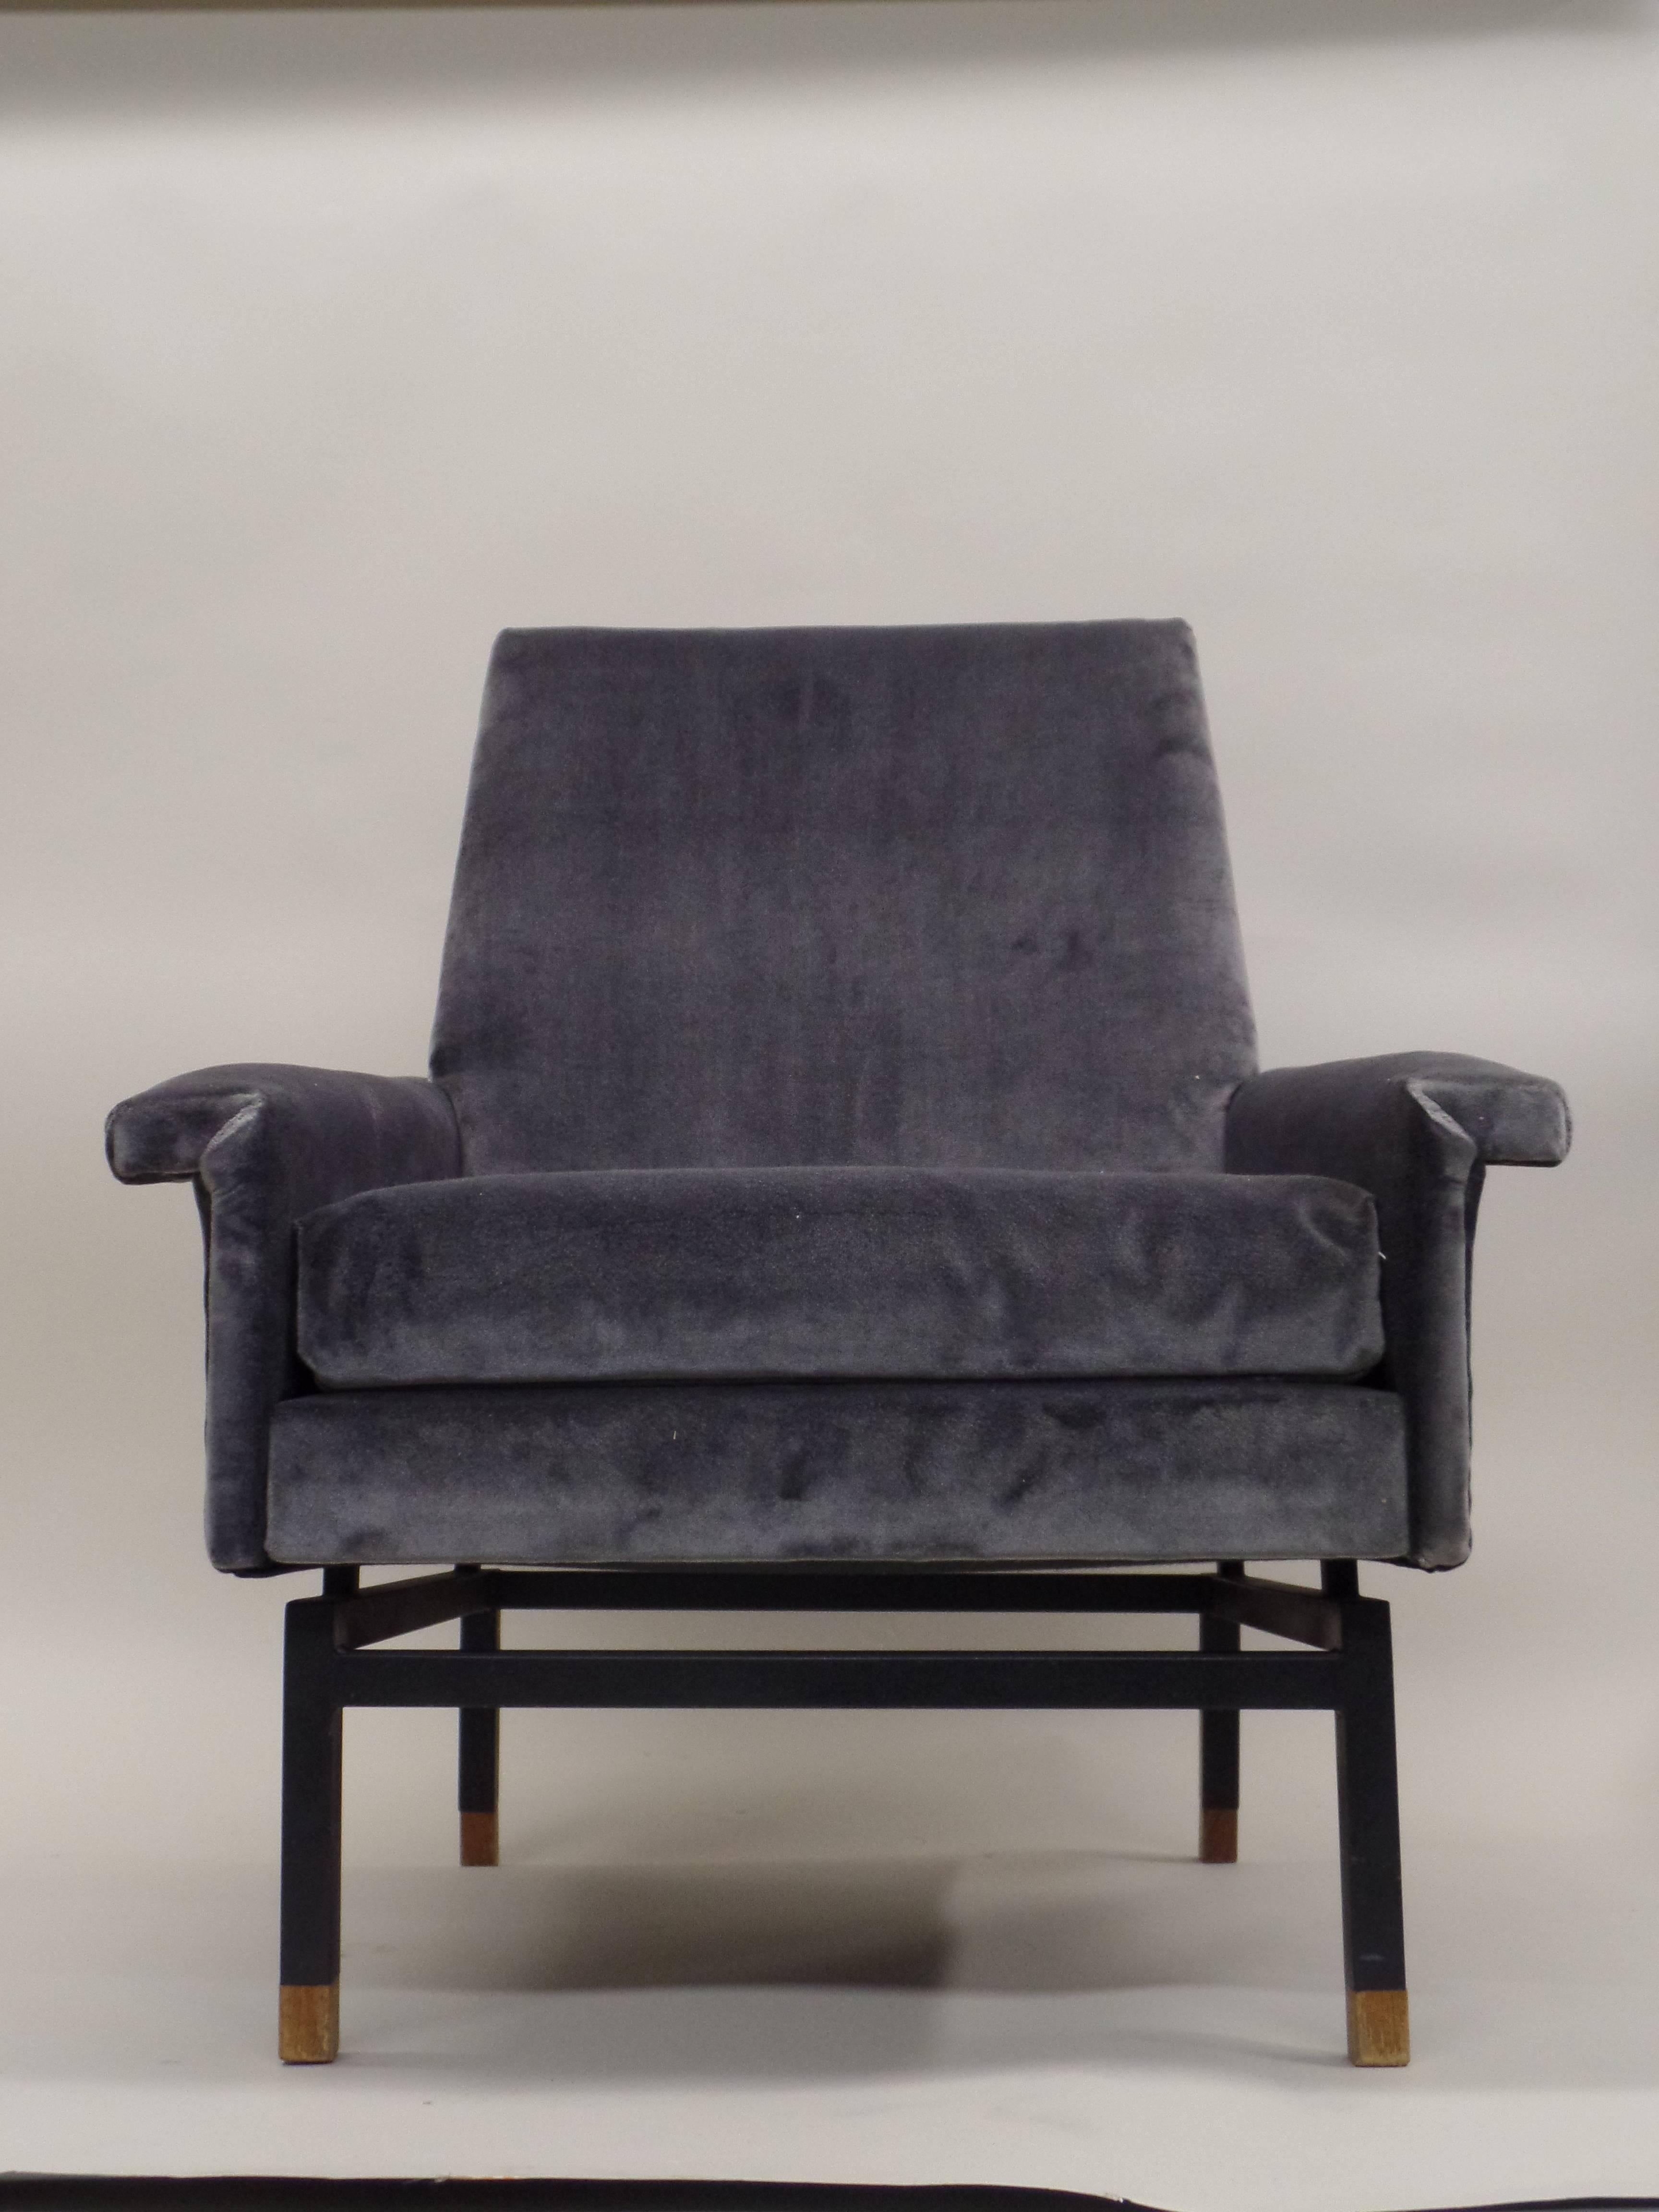 Elegant pair of Italian Mid-Century Modern armchairs attributed to Gianfranco Frattini. The chairs are stylish and comfortable and feature elements of modern architecture. The frame comprising the seat and back is raised and cantilevered over the